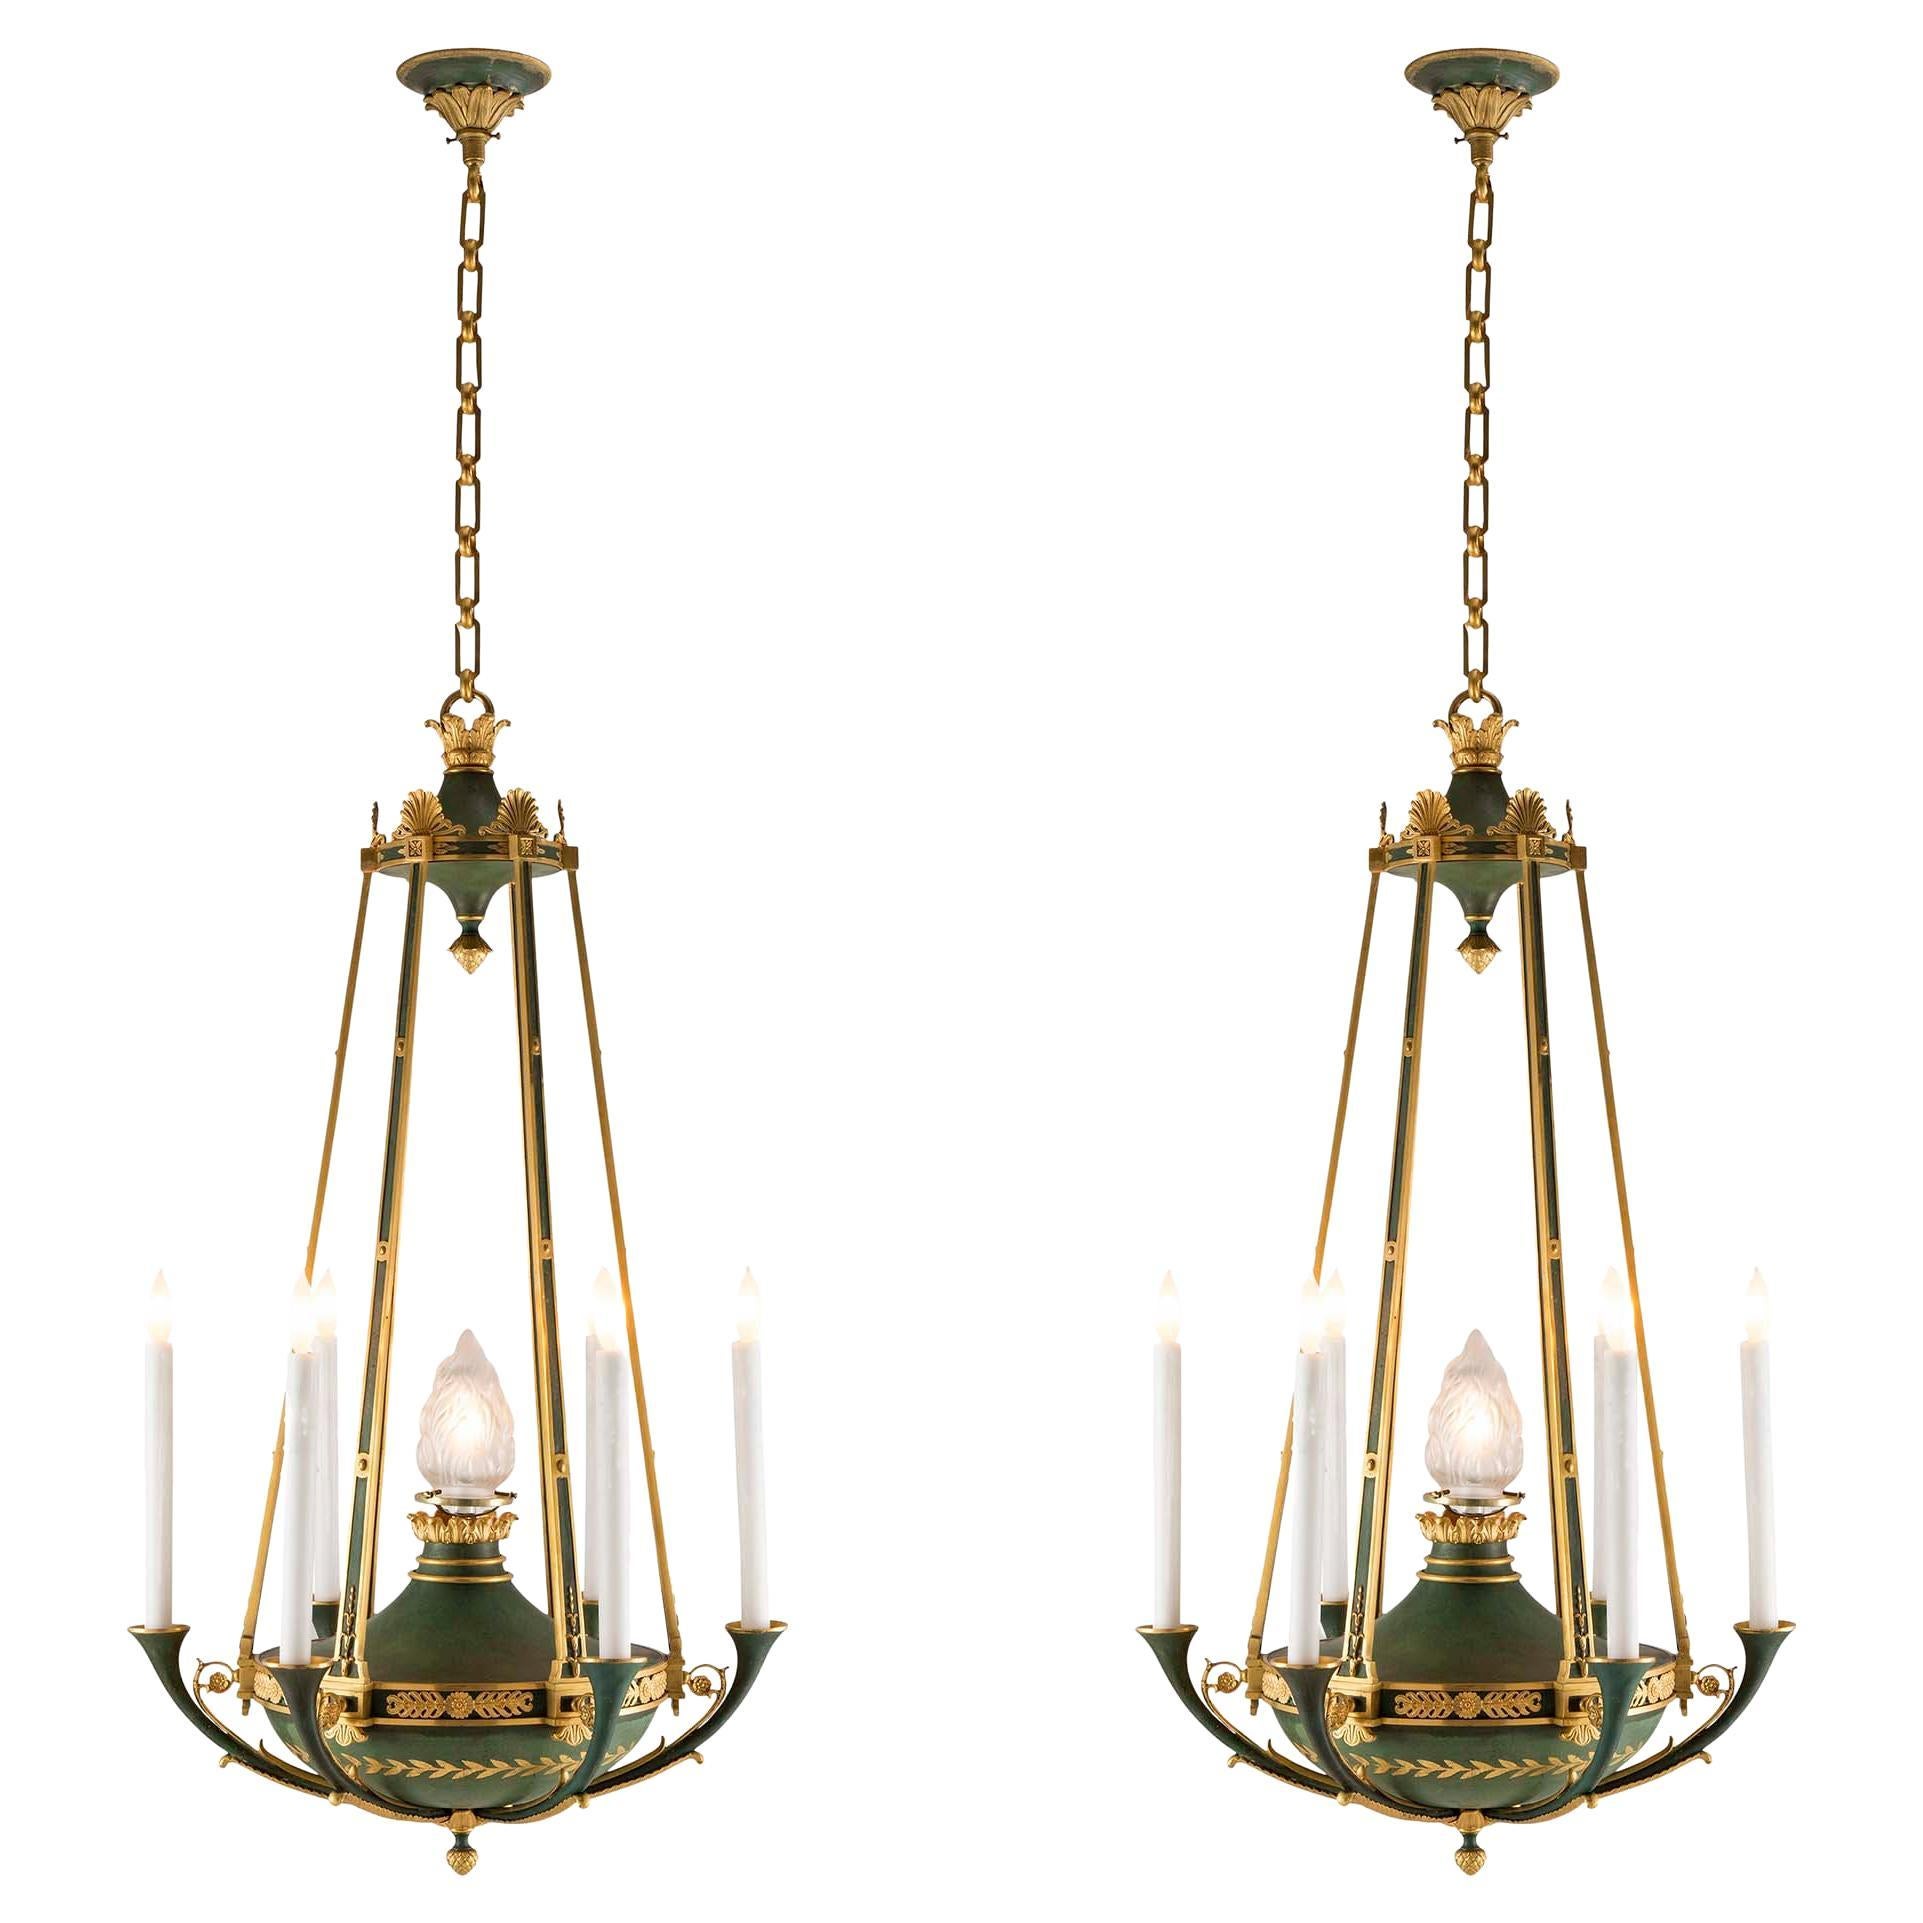 Pair of French 19th Century Neoclassical Style Ormolu and Verdigris Chandeliers For Sale